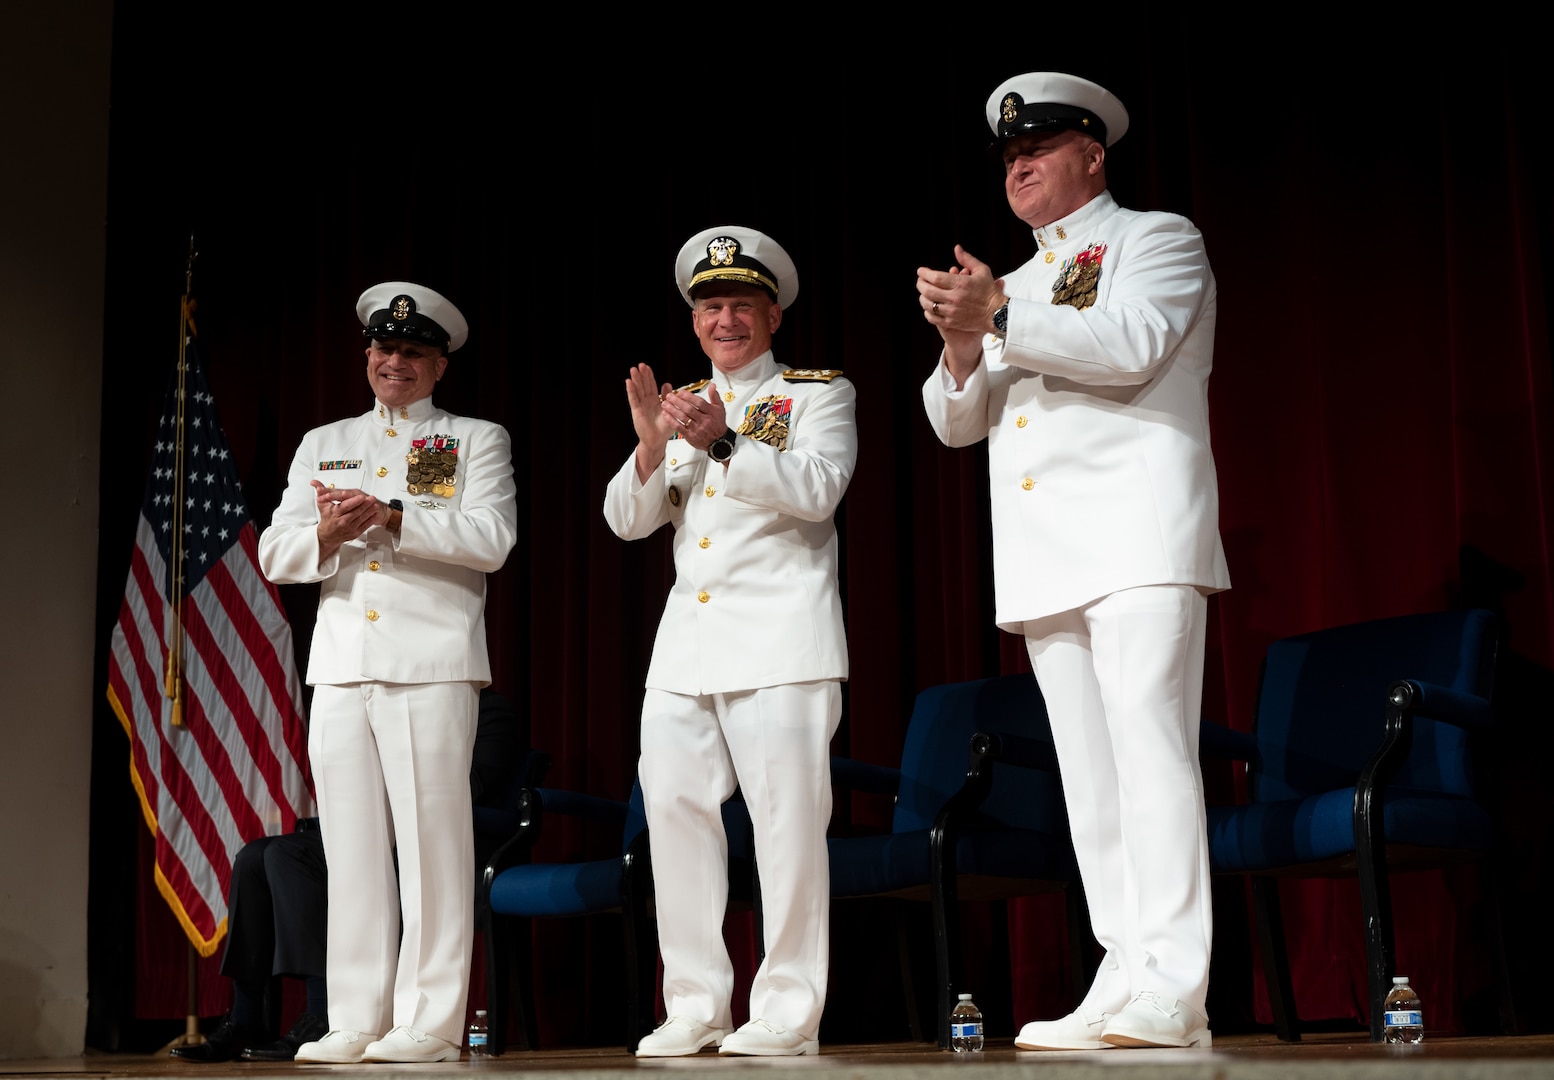 Chief of Naval Operations Adm. Mike Gilday, center, stands with Master Chief Petty Officer of the Navy (MCPON) Russell Smith, left, and MCPON James Honea during the MCPON Change of Office ceremony held at Mahan Hall, United States Naval Academy, Sept. 8, 2022.